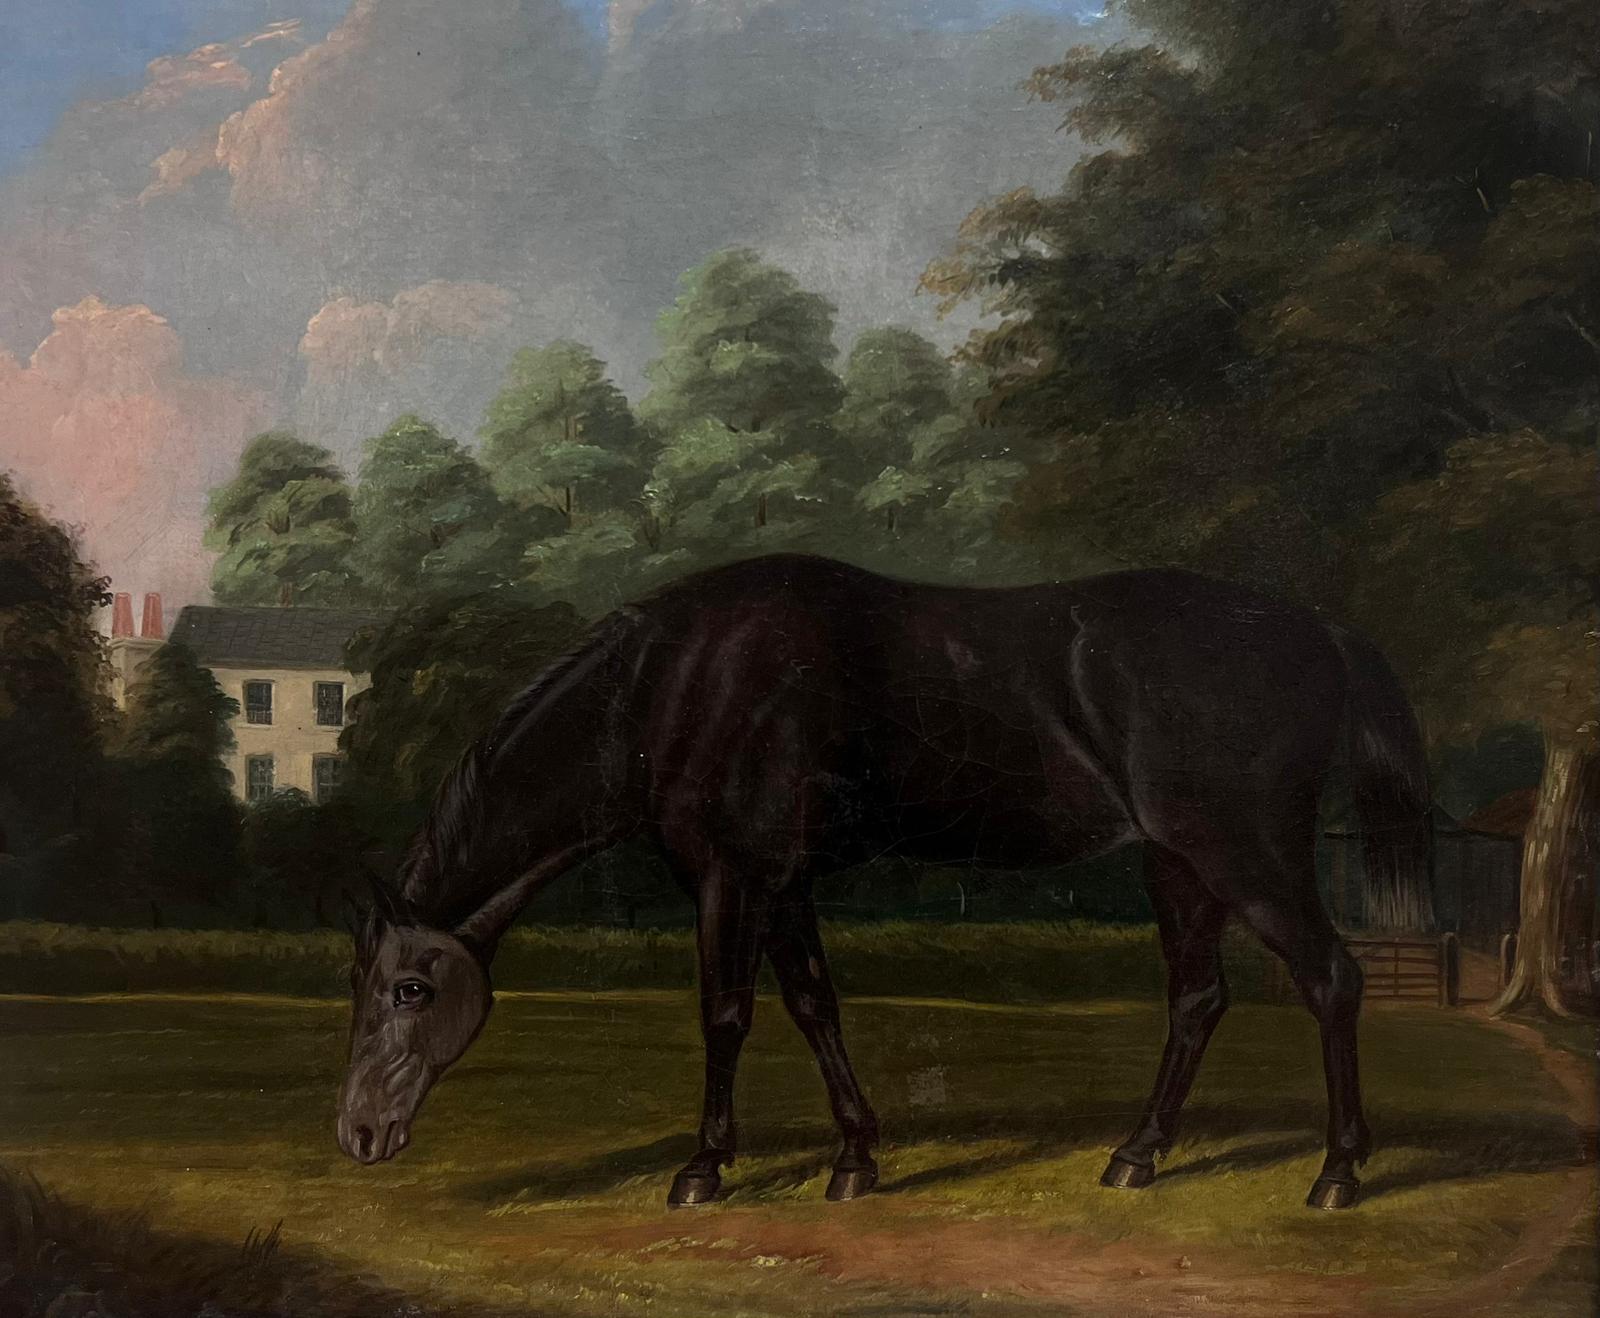 Horse in Country House Landscape
French artist, 19th century
oil on canvas, framed in antique maple wood frame
framed: 25 x 29 inches
board: 20 x 24 inches
provenance: private collection, France
condition: very good and sound condition